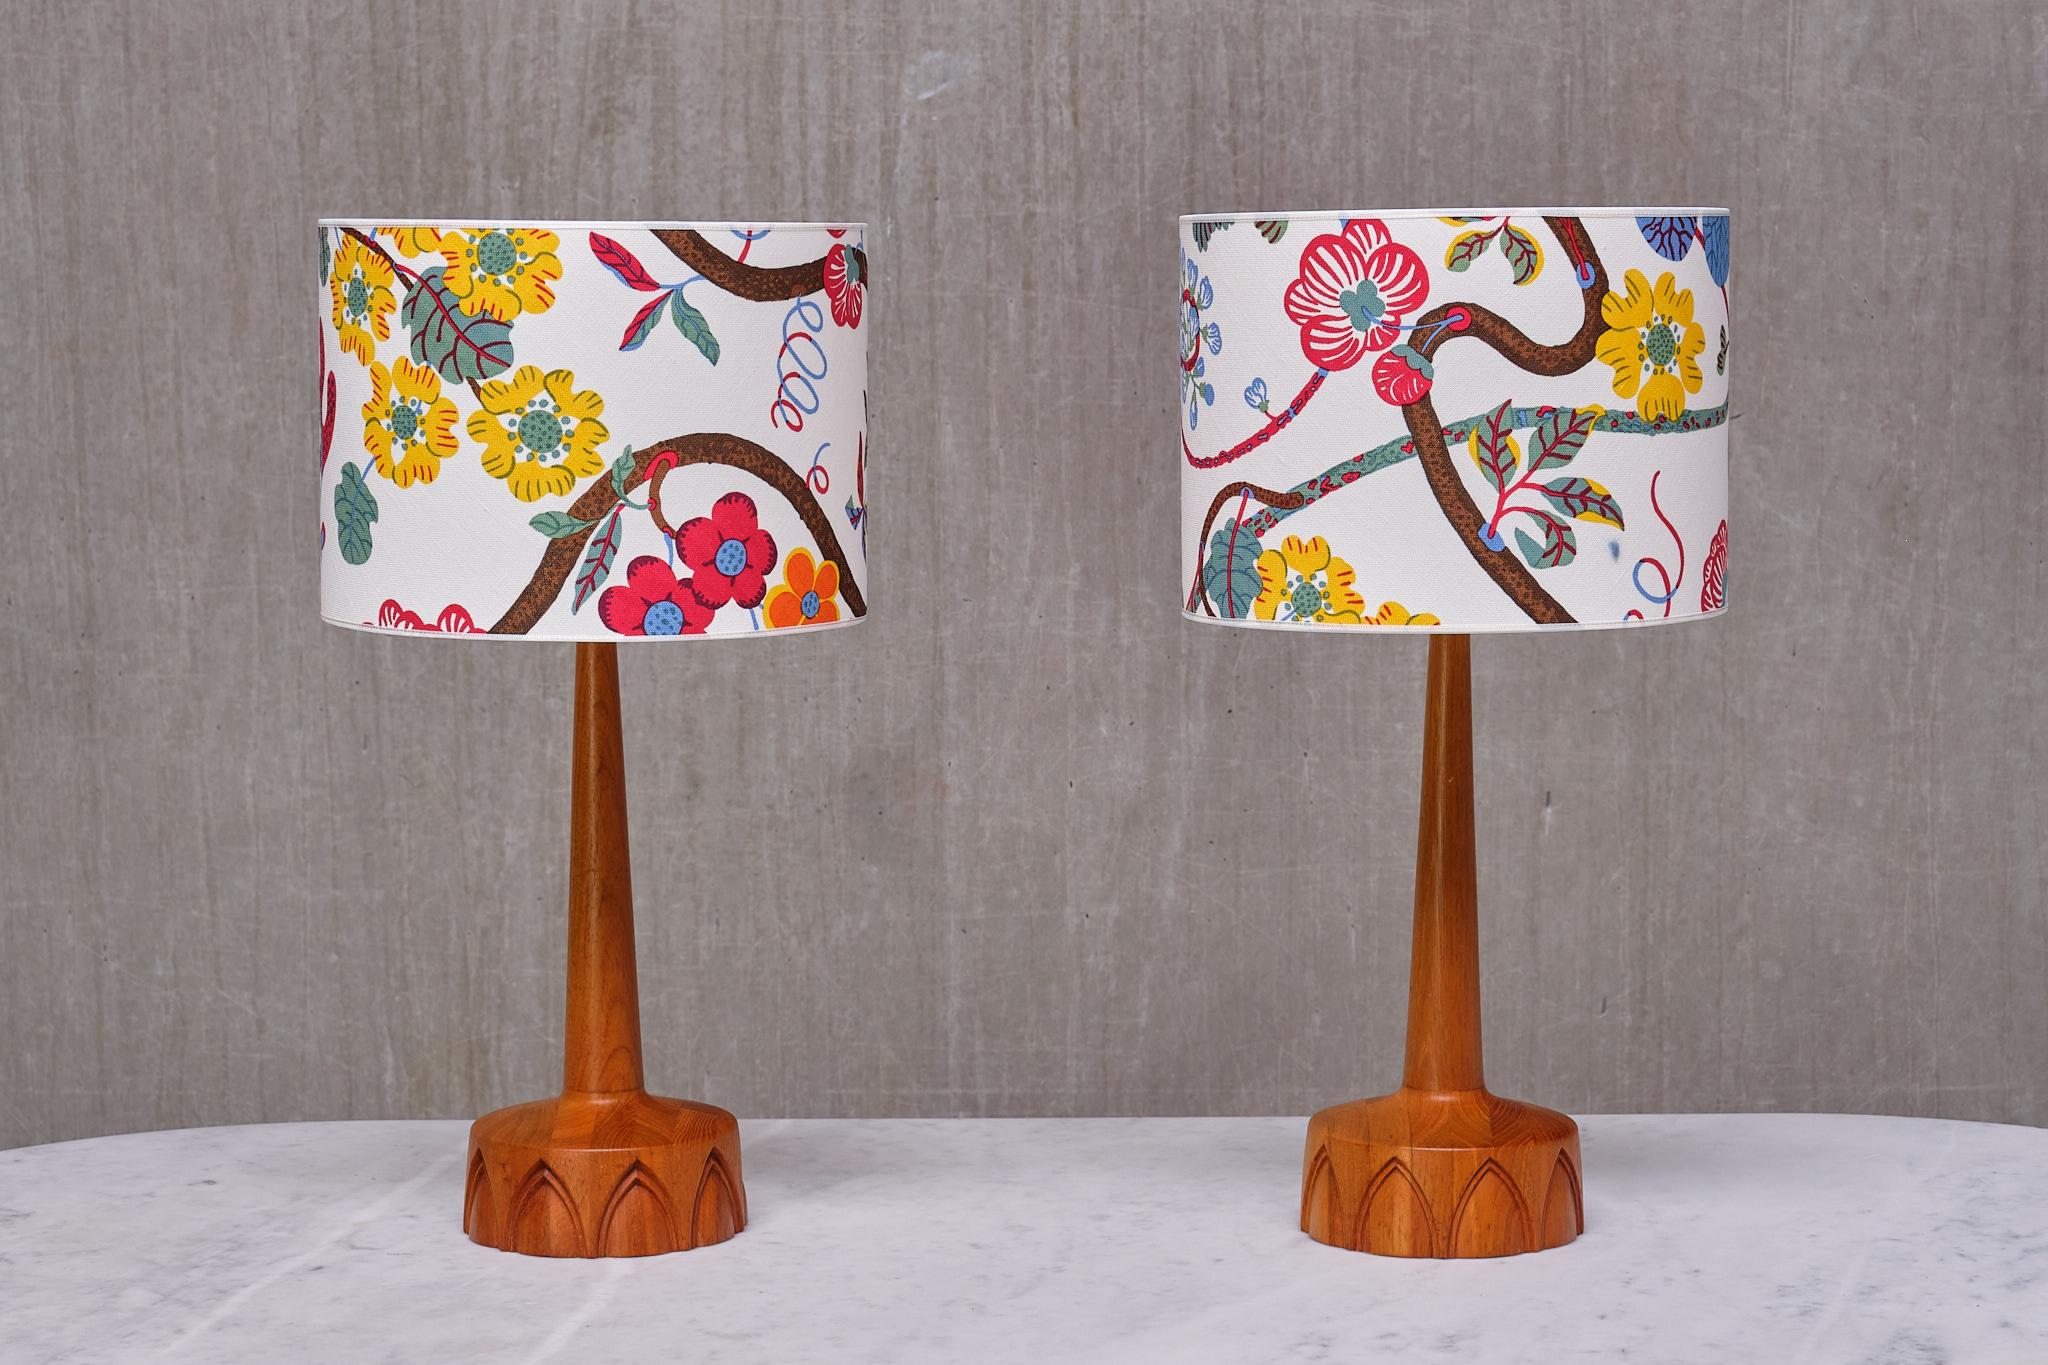 Pair of Stilarmatur Tranås Table Lamps with Josef Frank Shades, Sweden, 1960s For Sale 4